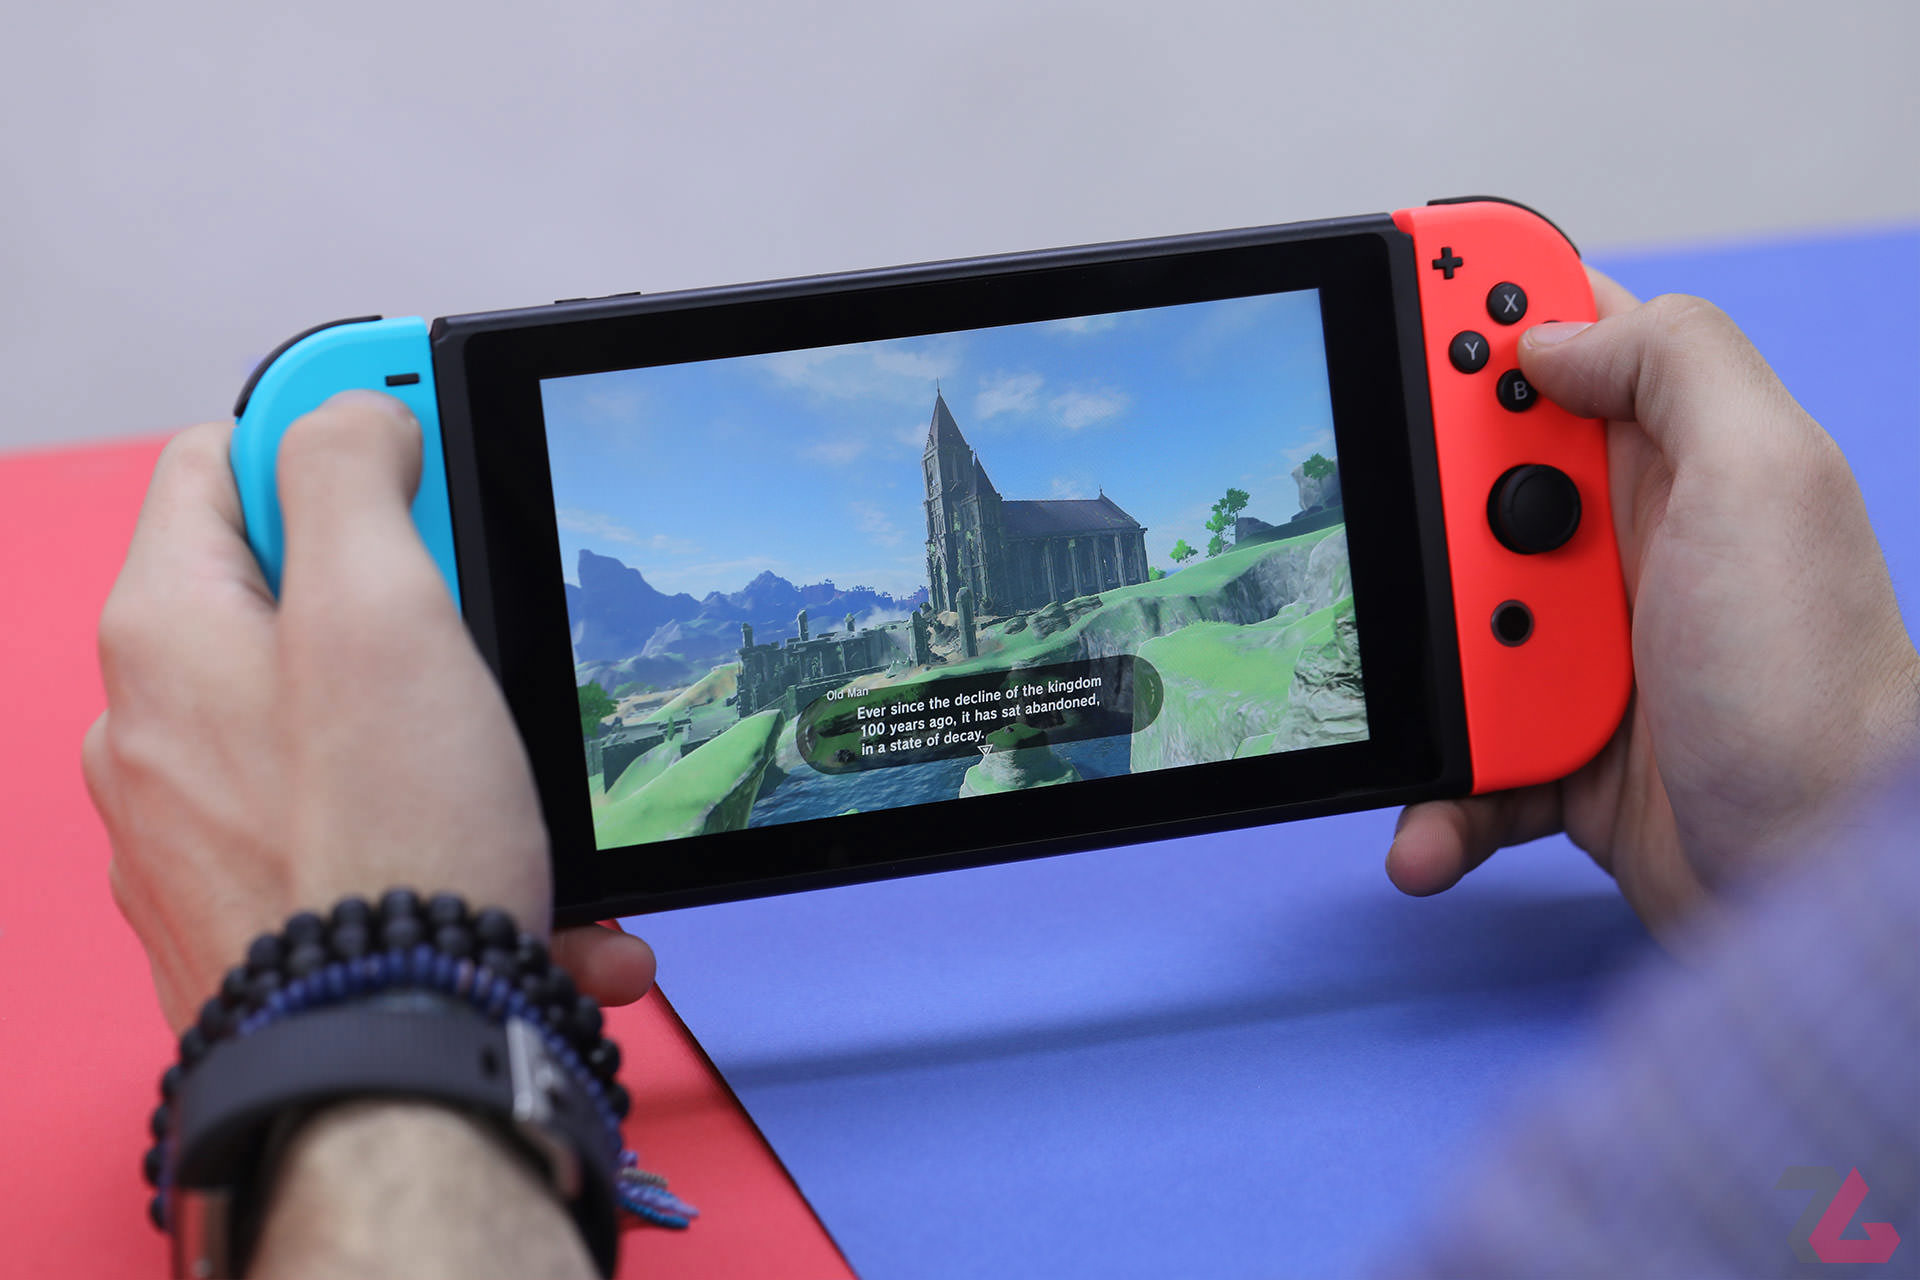 2021 3 nintendo switch gaming console in hand playing zelda zoomg 638bb3d11d67bb742b227206